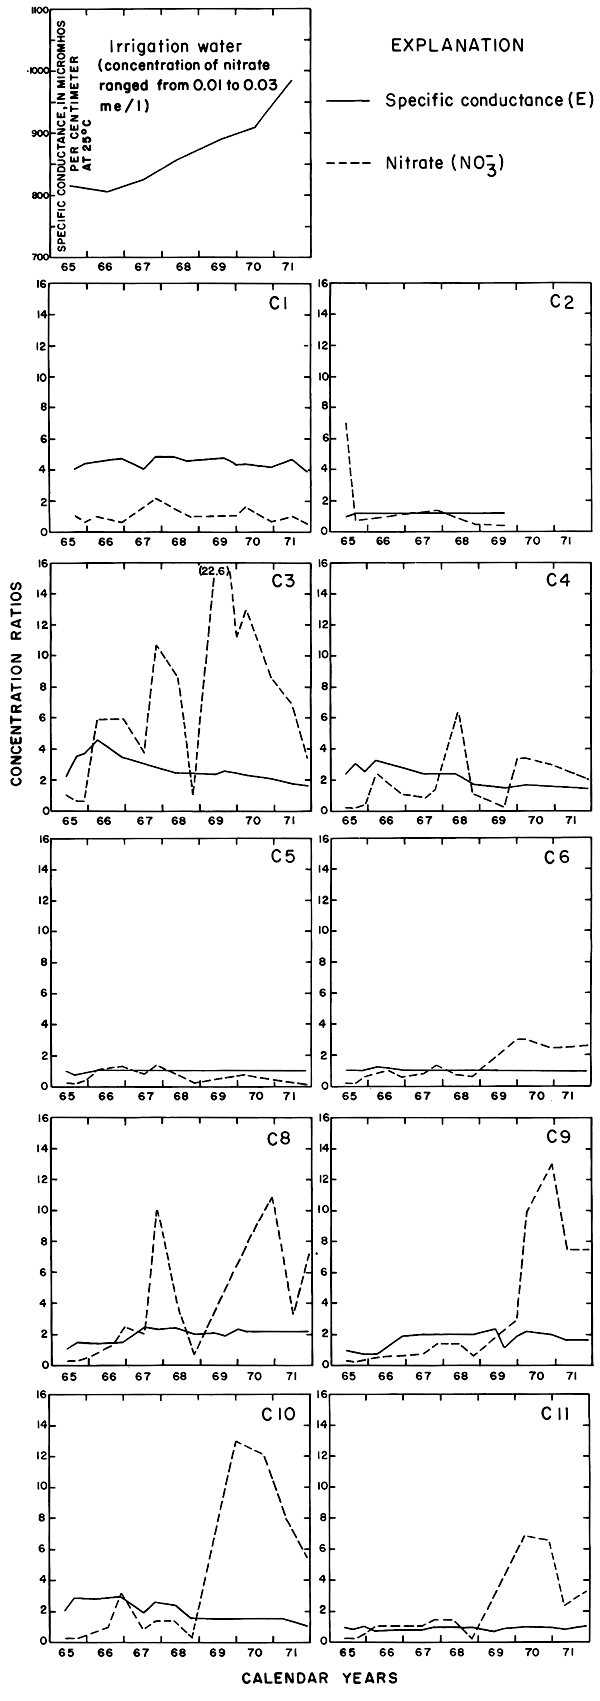 Specific conductance and nitrate plotted for 10 wells, compared to an additional plot for irrigation water.